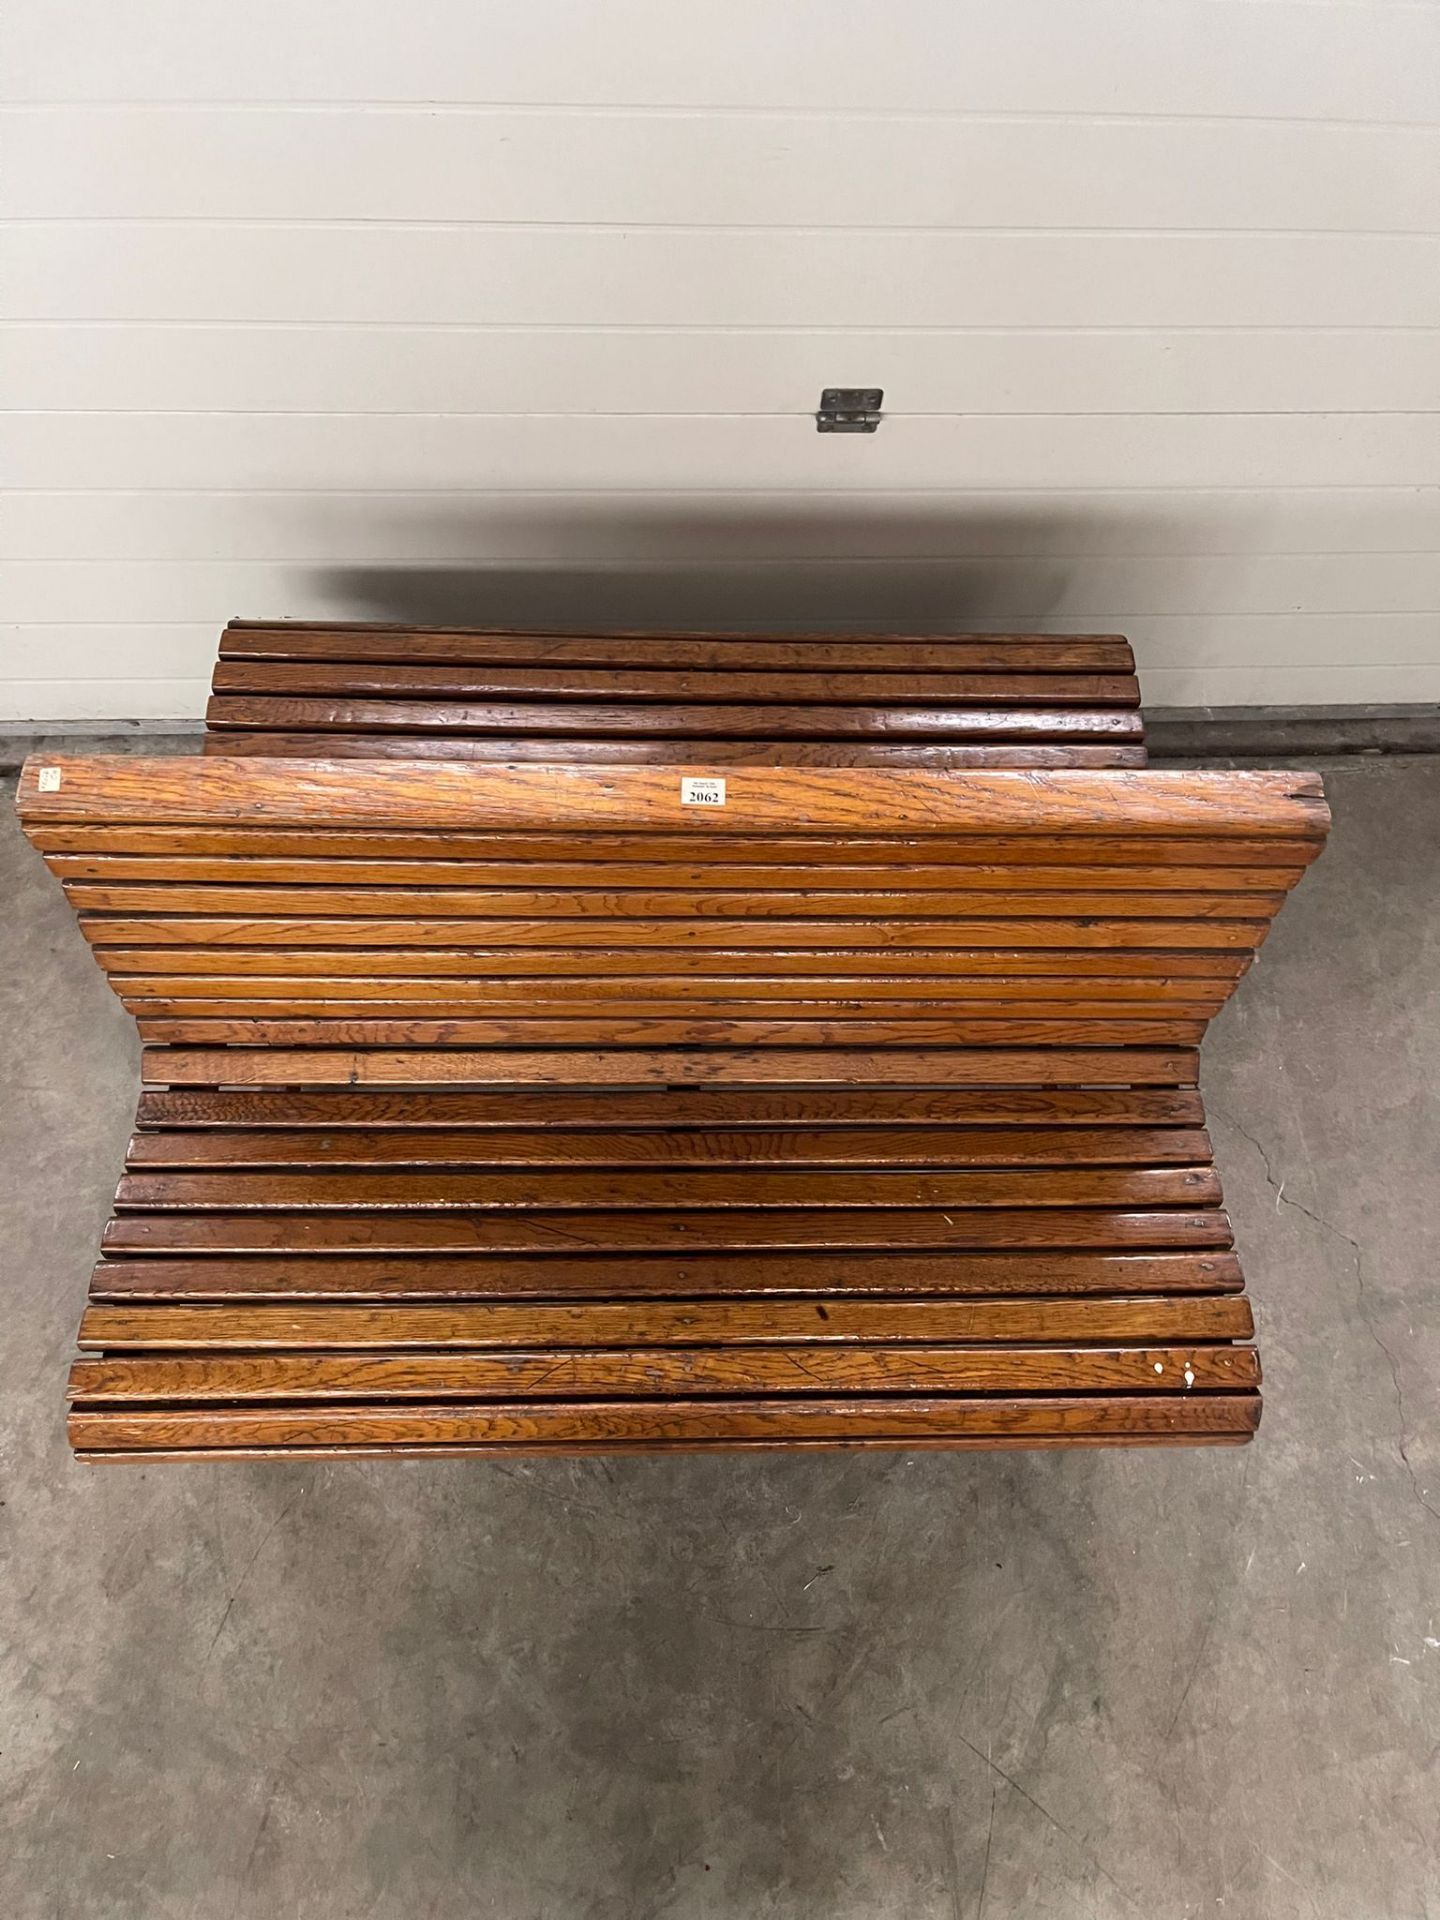 Double Sided Wooden Bench from Amsterdam Tour Boat - Image 3 of 3